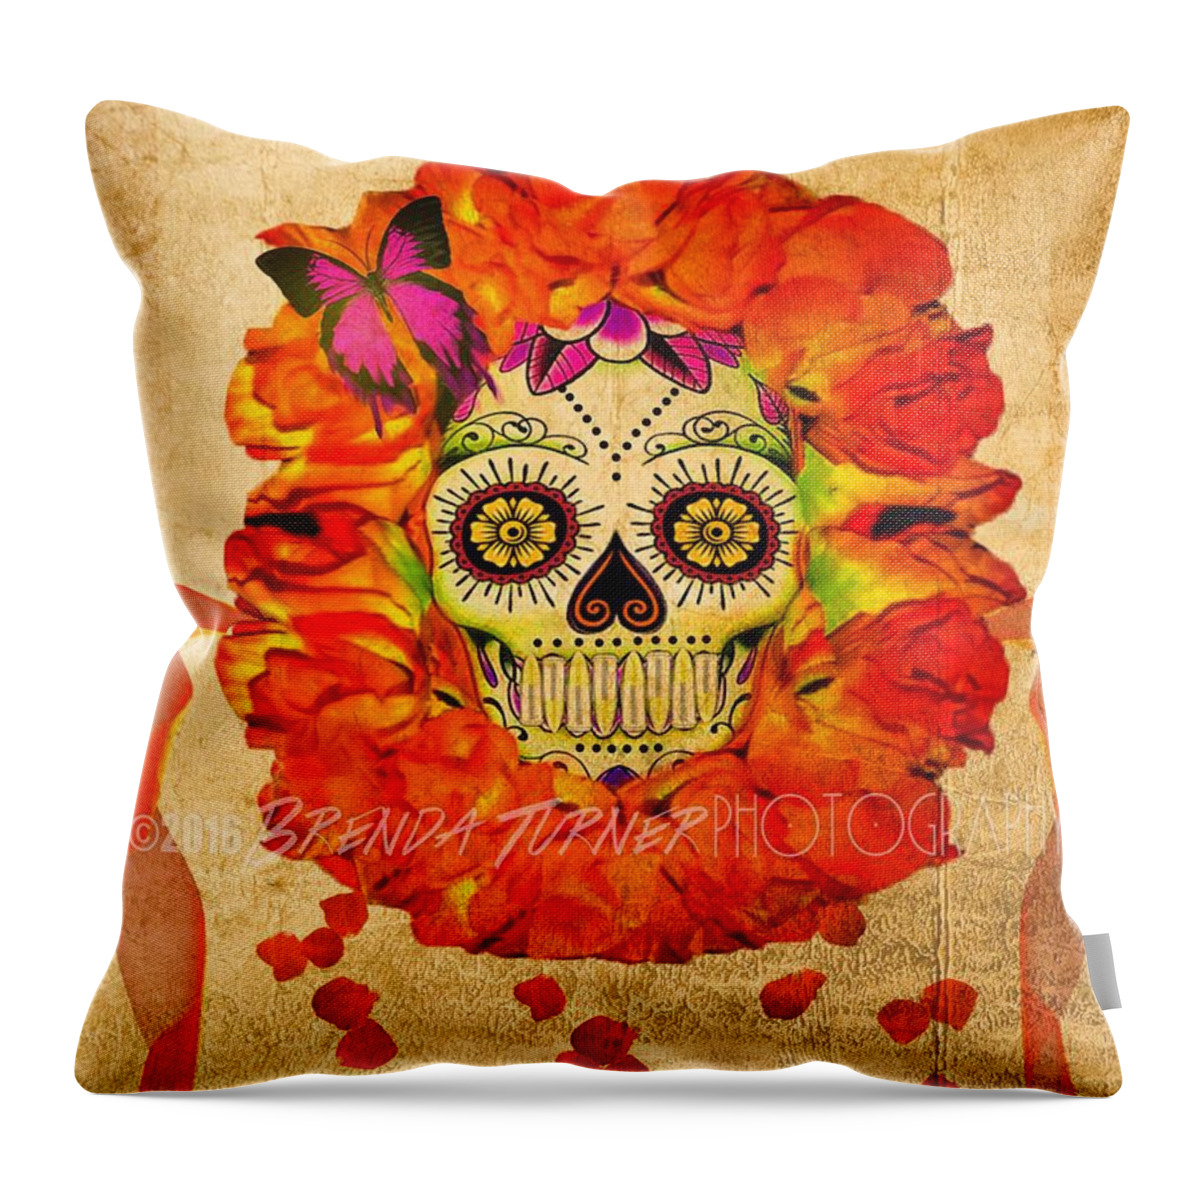 Day Of The Dead Throw Pillow featuring the digital art Cara de la Flor by Brenda Turner